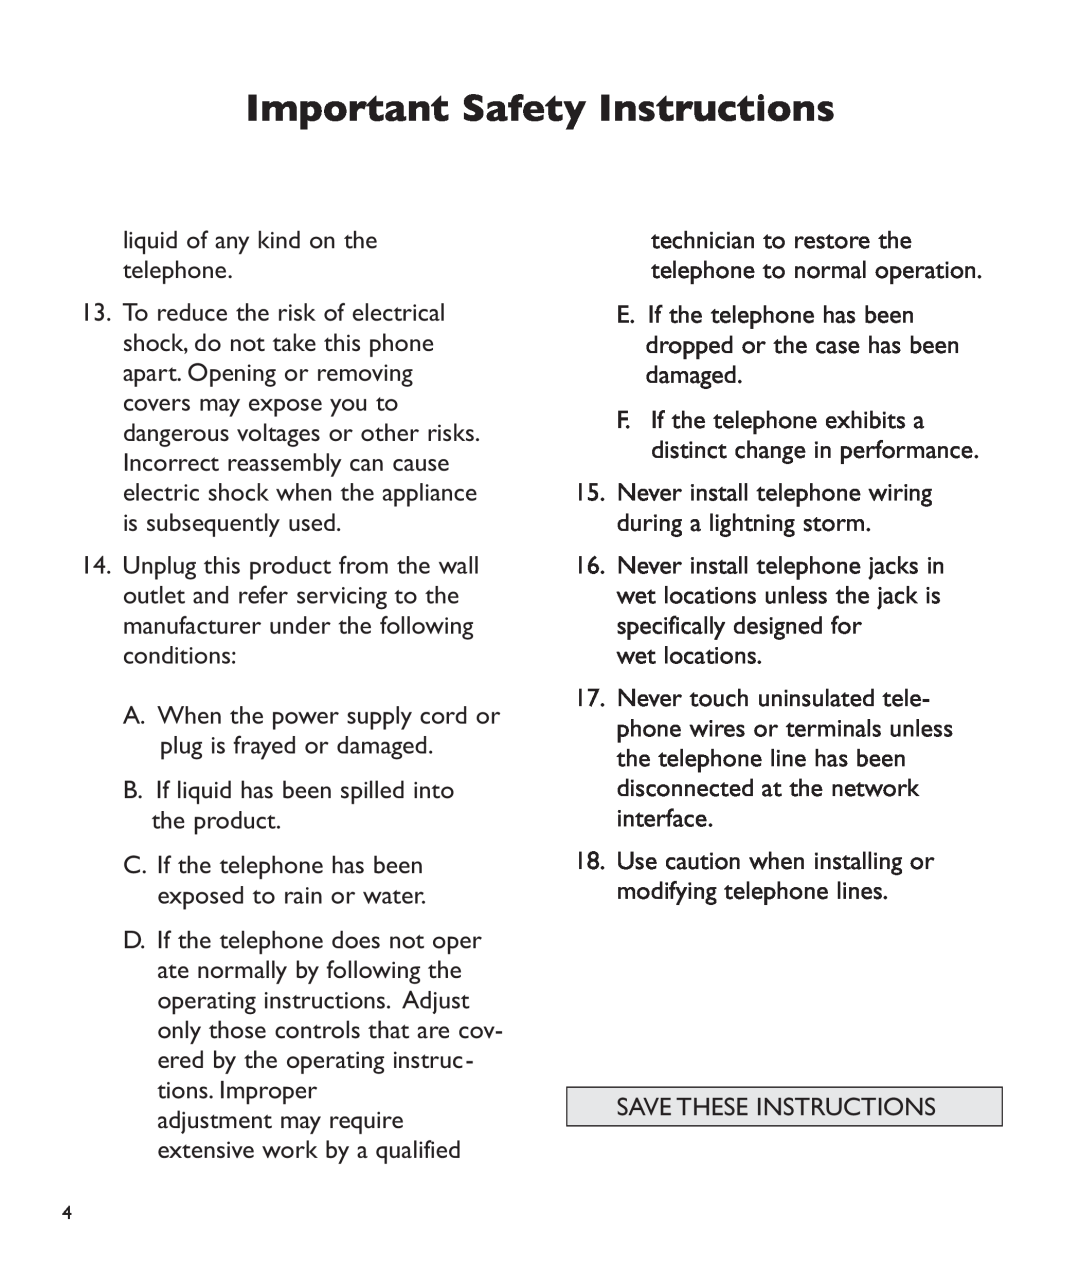 Clarity c2210 manual Important Safety Instructions, liquid of any kind on the telephone 